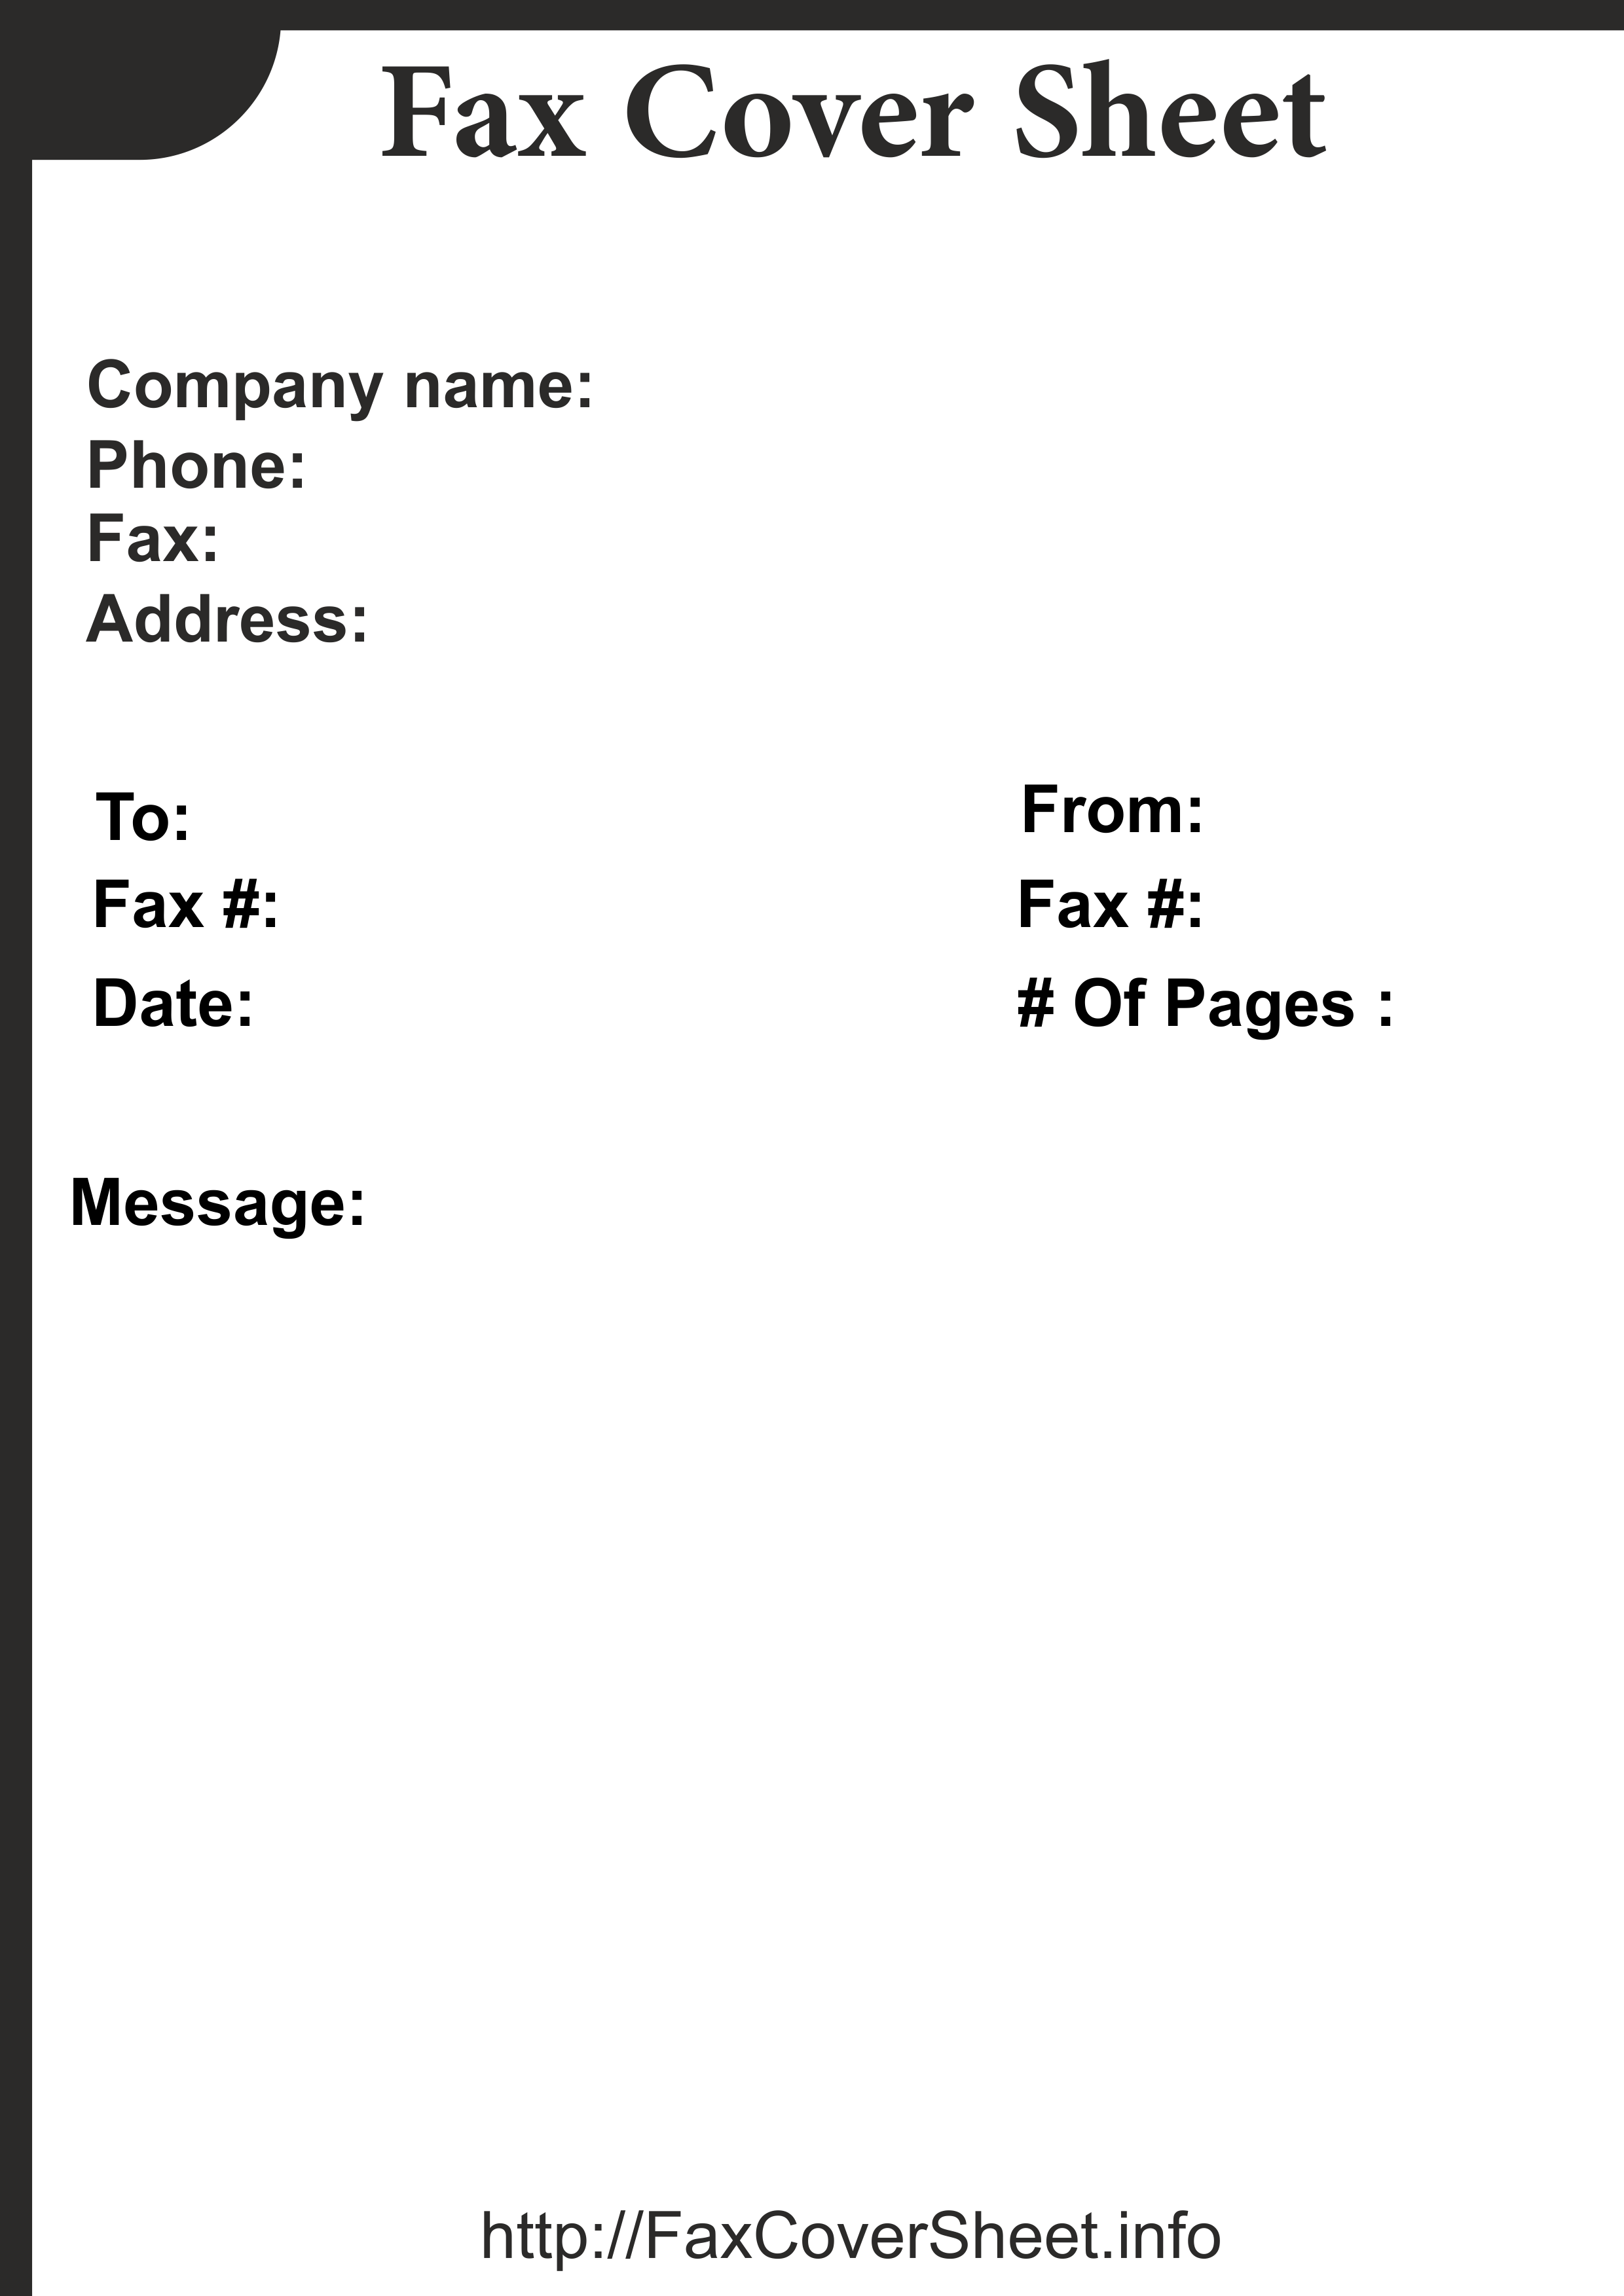 Fax Cover Sheet Free